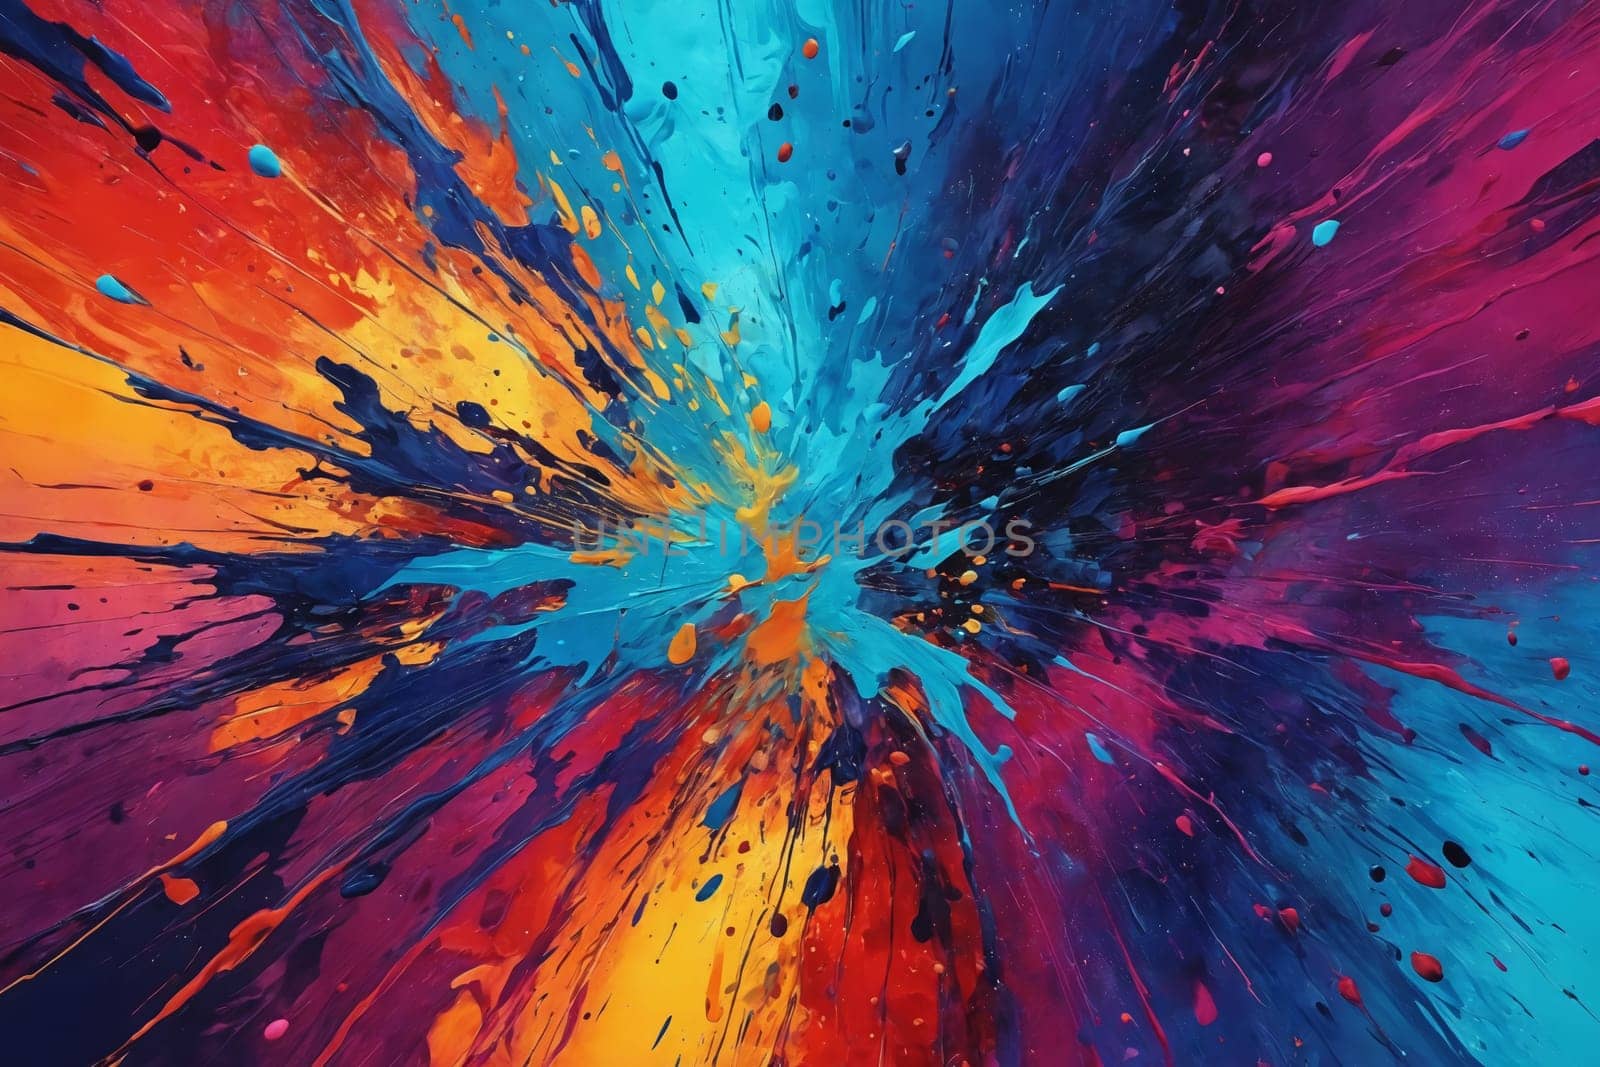 Delve into the detailed texture of this splatter painting image, where chaos meets beauty. Ideal for artist portfolios, home decor advertisements, or stimulating a lively discussion on abstract art.